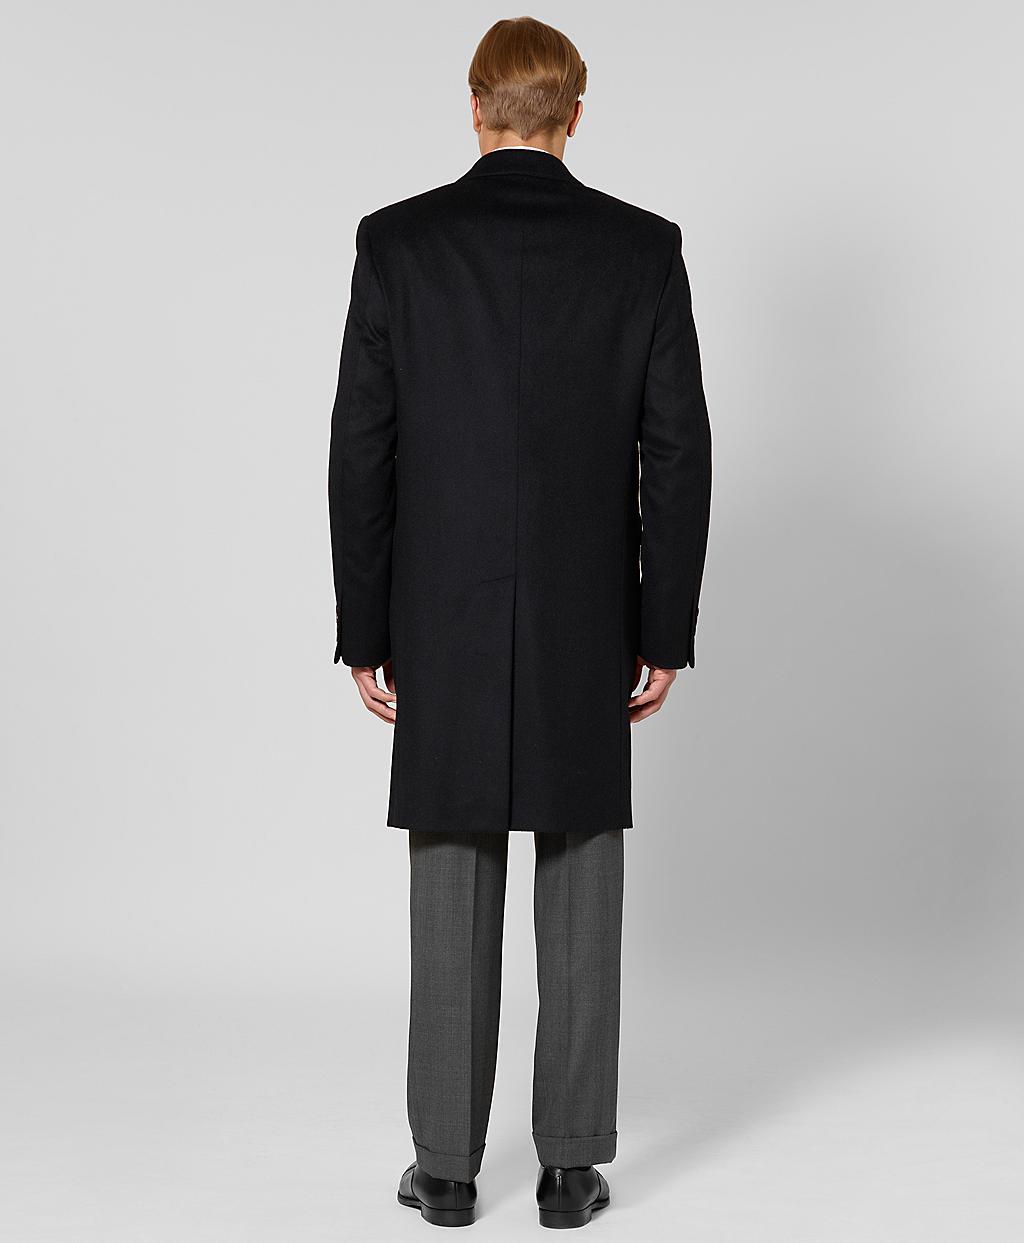 Brooks Brothers Wool and Cashmere Classic Overcoat in Black for Men - Lyst